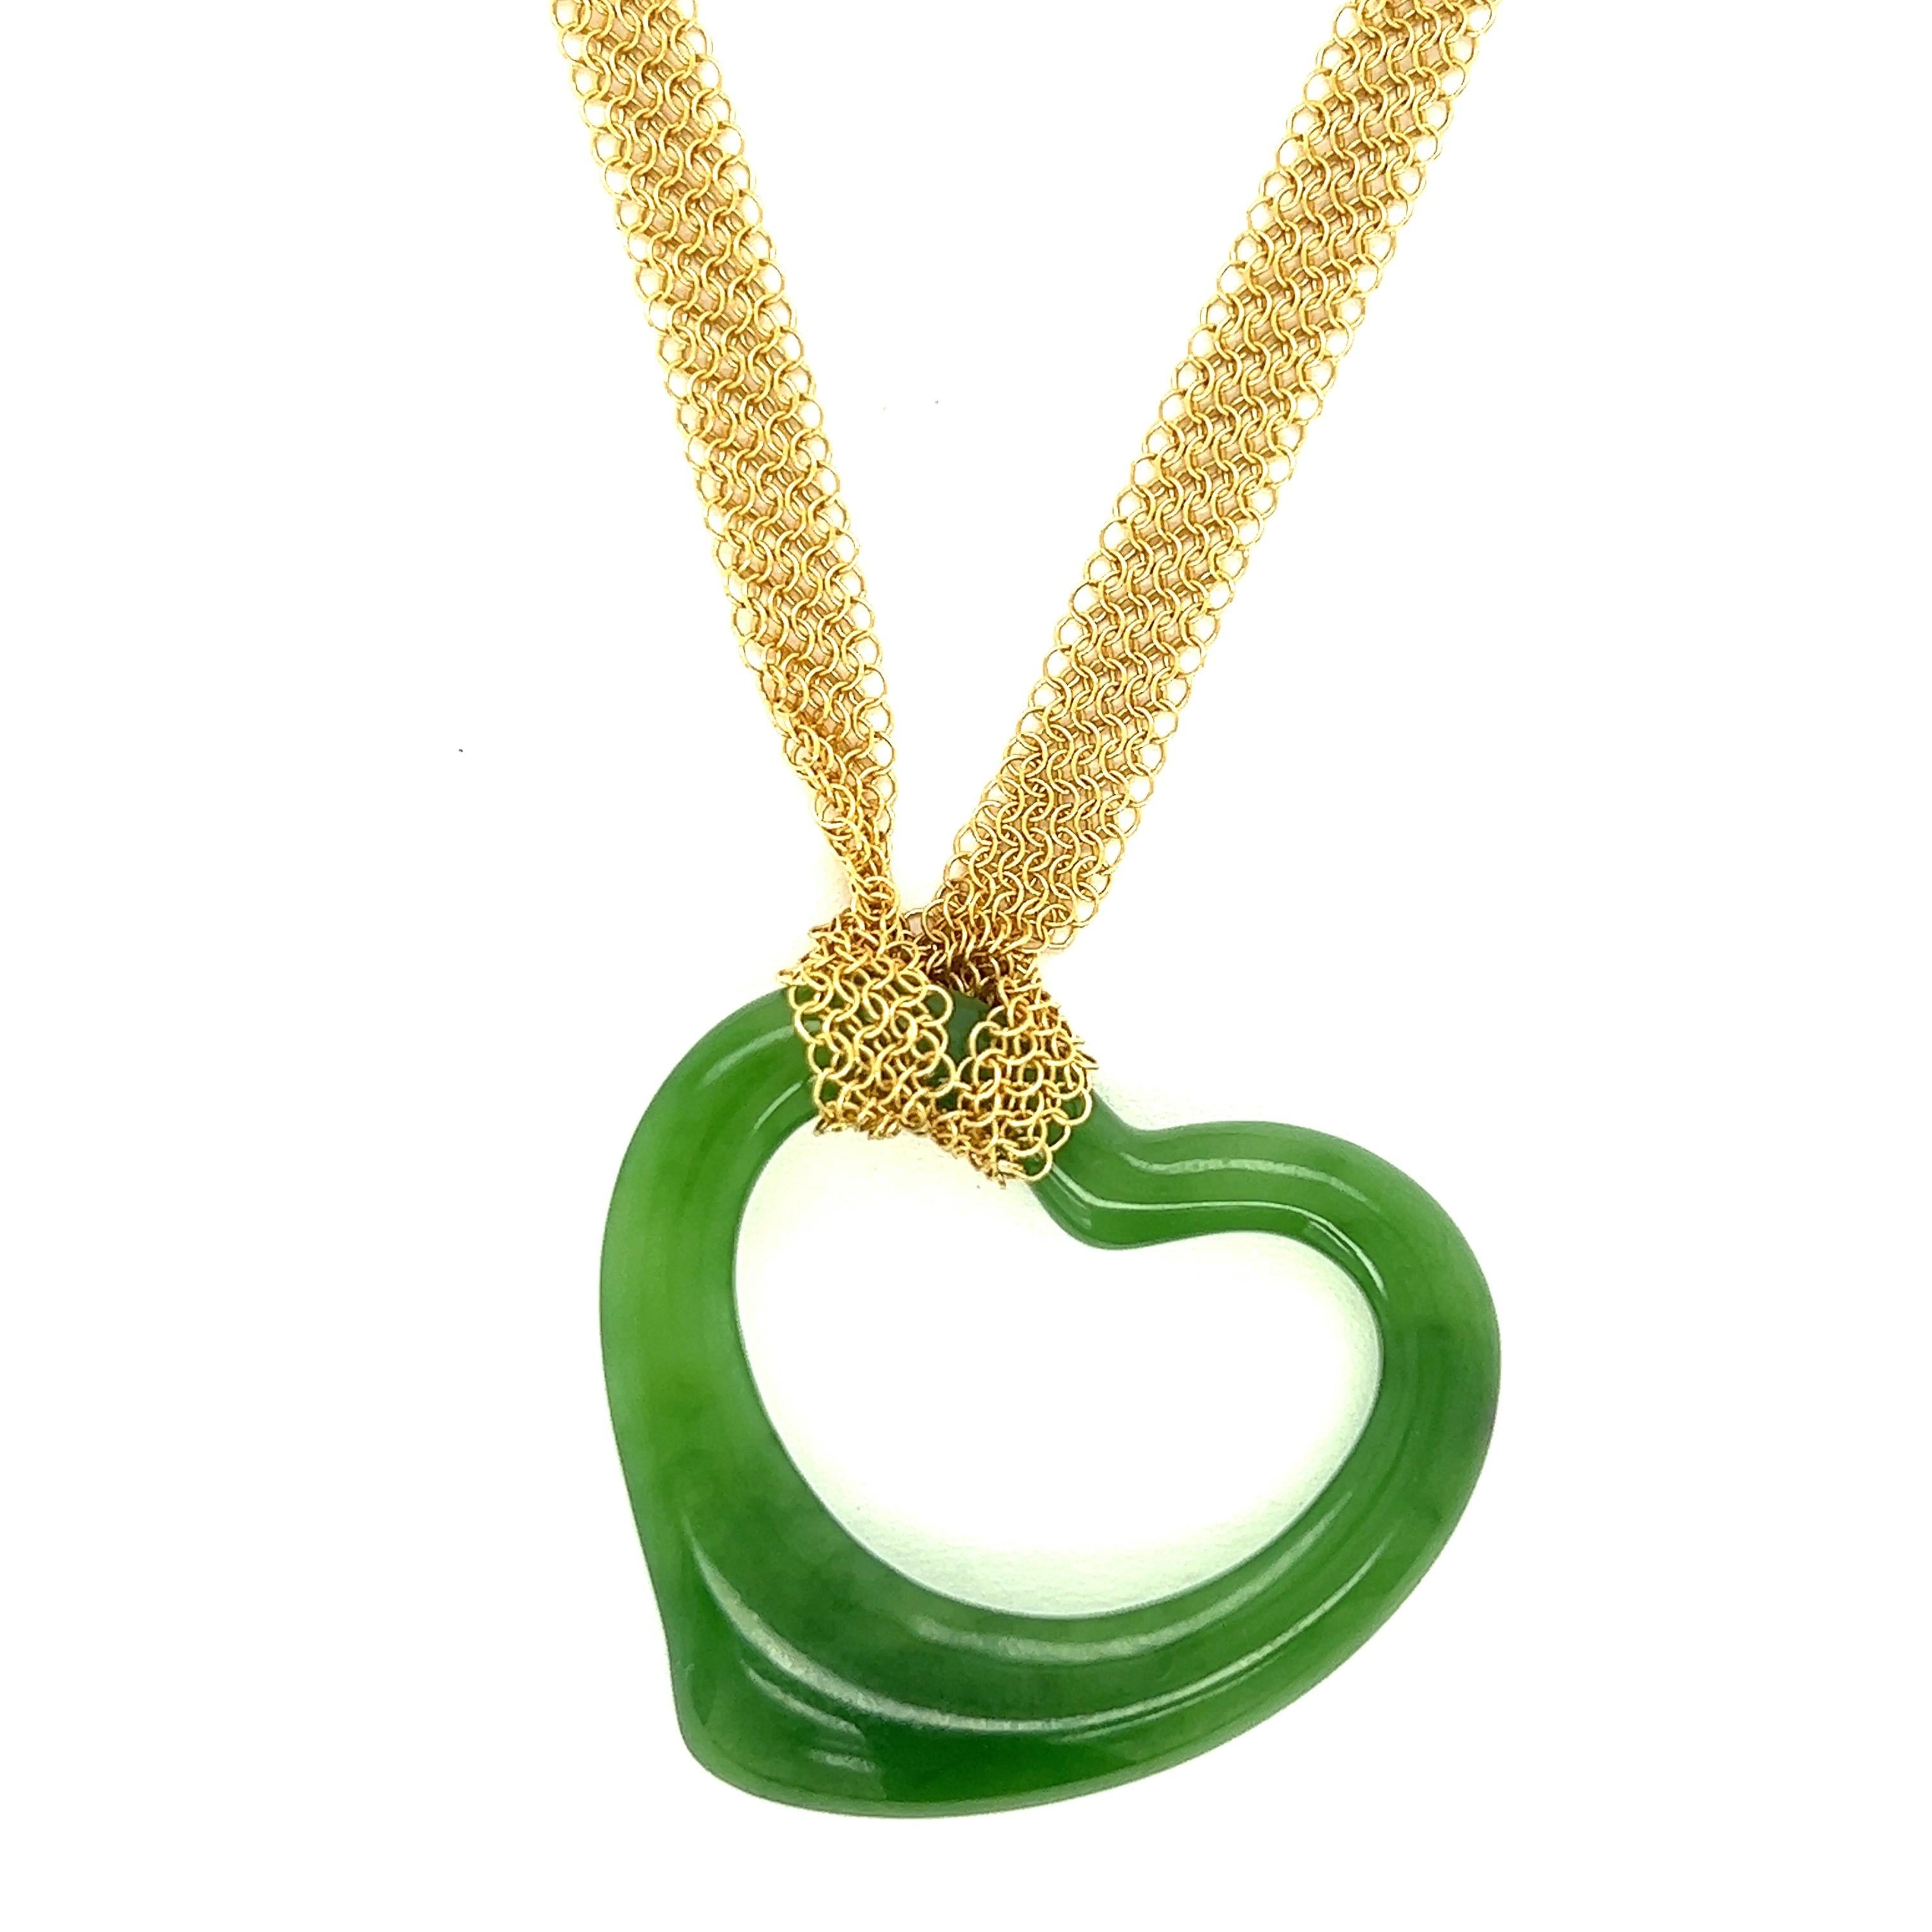 Elsa Peretti for Tiffany & Co. Open Heart Jade Pendant Long Mesh Necklace

Heart shaped jade pendant with long 18 karat yellow gold mesh chain (38 cm); marked T&Co., Au750, Peretti

Pendant size: width 3.5 cm, length 3.3 cm
Total weight: 16.6 grams